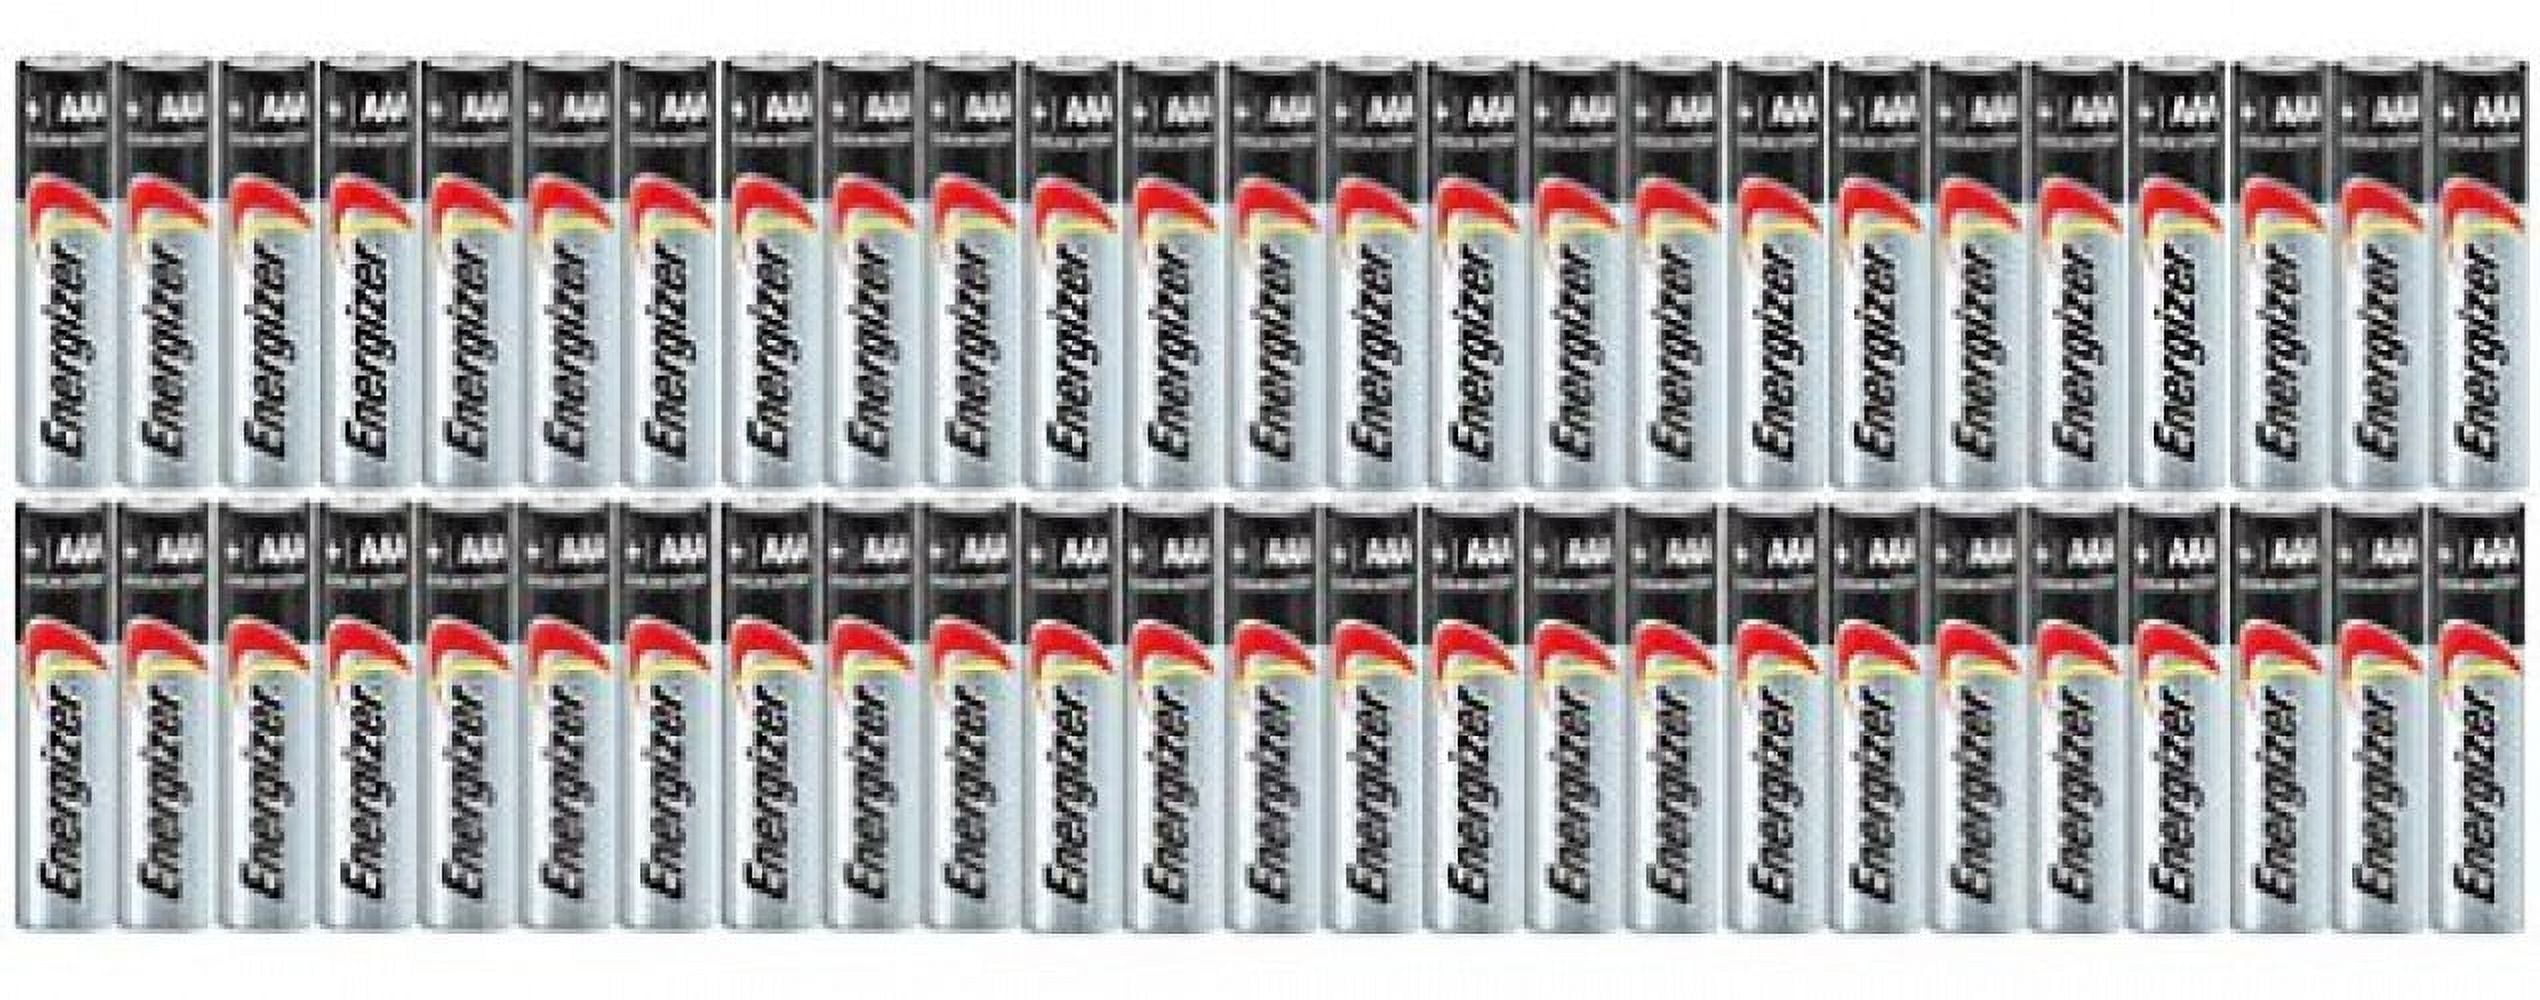 Energizer Max Plus AAA Alkaline Batteries (Pack of 50) E303865600